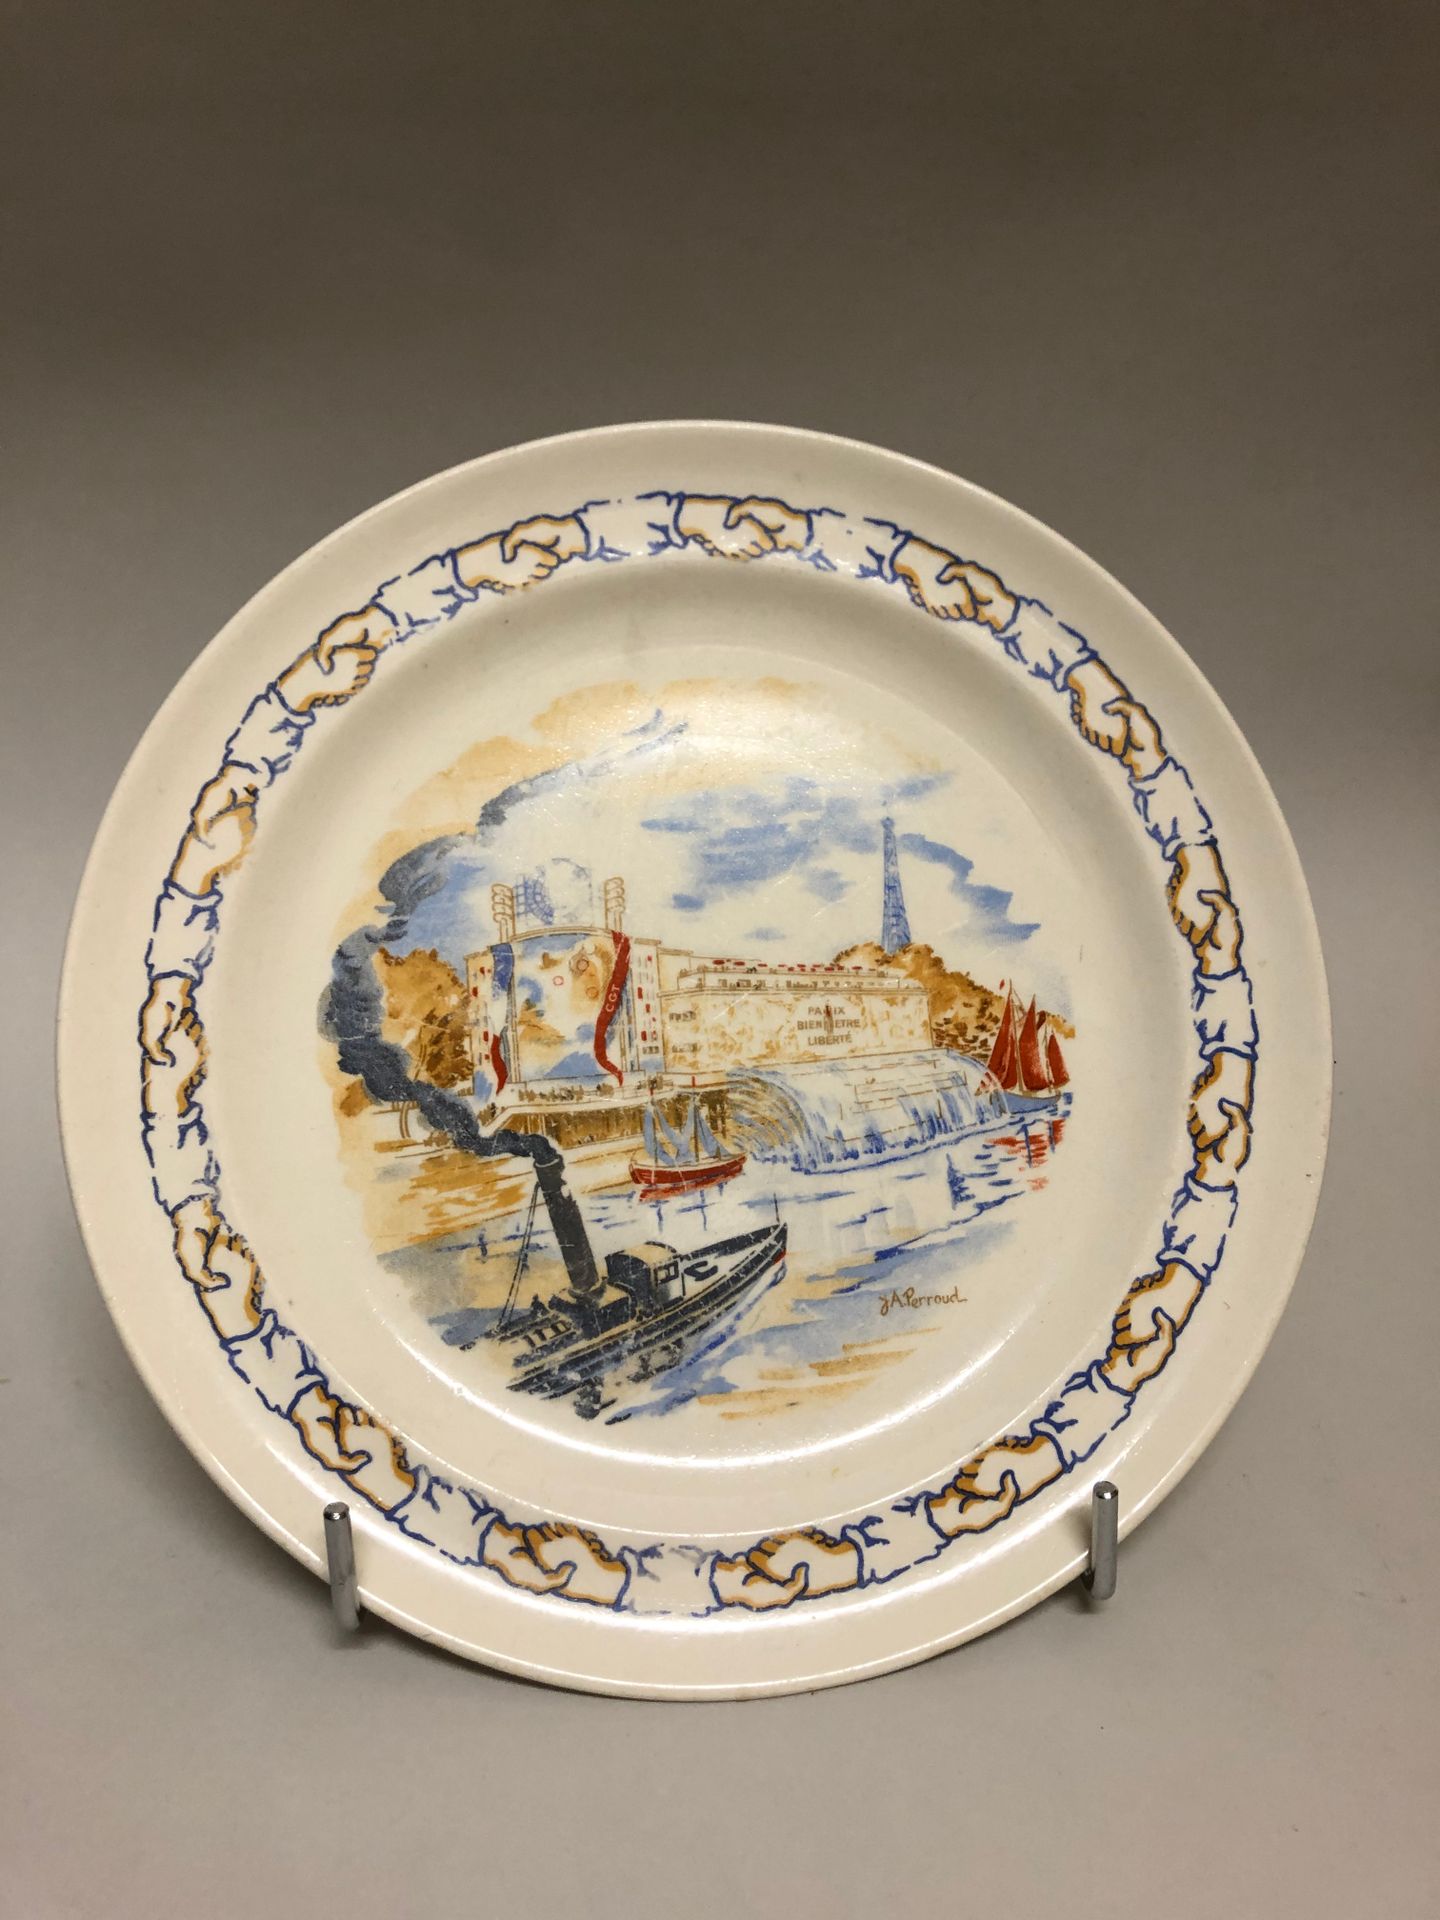 Null COMMEMORATIVE ASSIETTE for the Paris Exhibition, 1937. Decorated by J A Per&hellip;